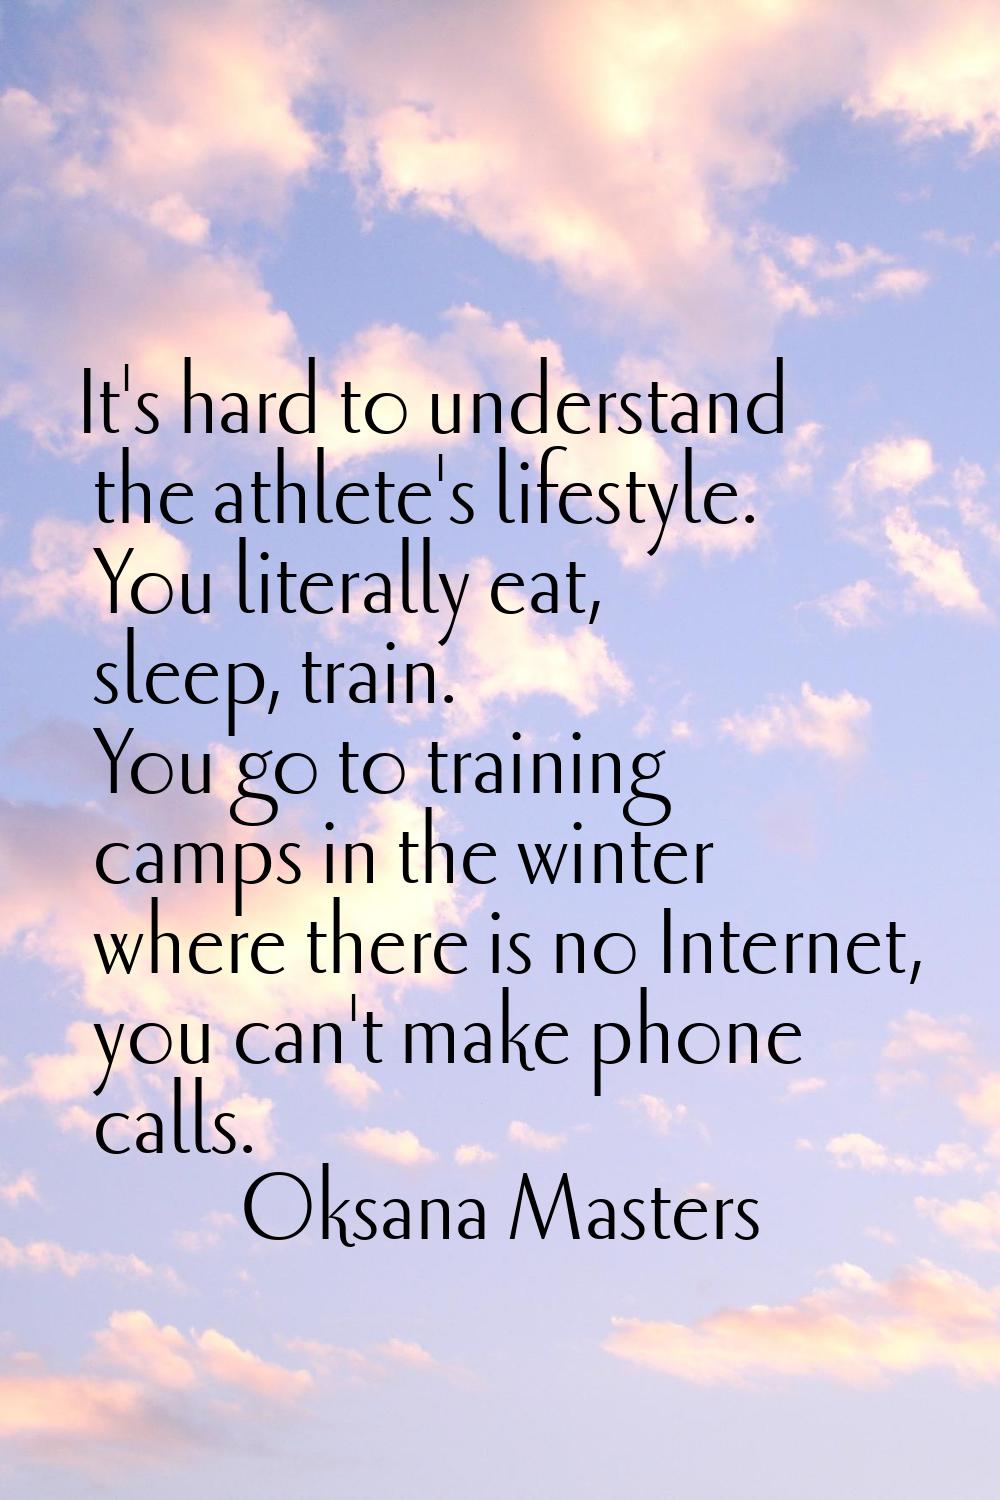 It's hard to understand the athlete's lifestyle. You literally eat, sleep, train. You go to trainin